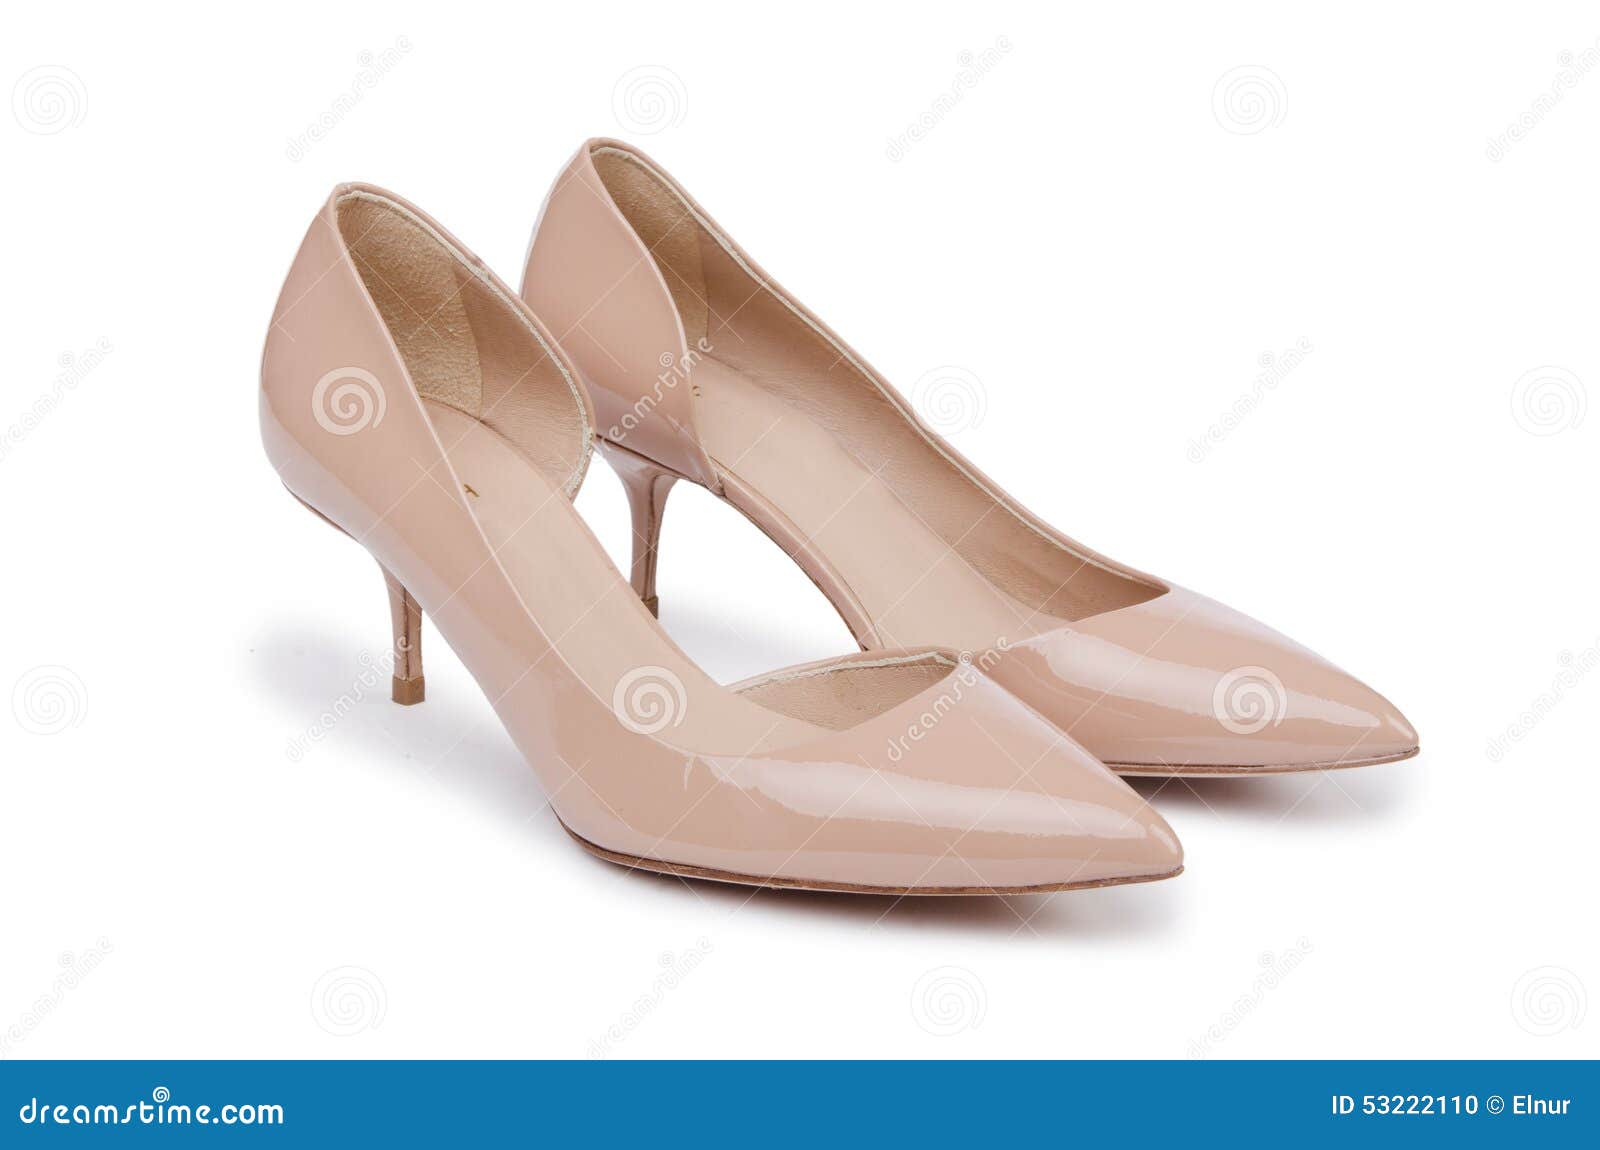 Woman Shoes on the White Background Stock Photo - Image of composite ...